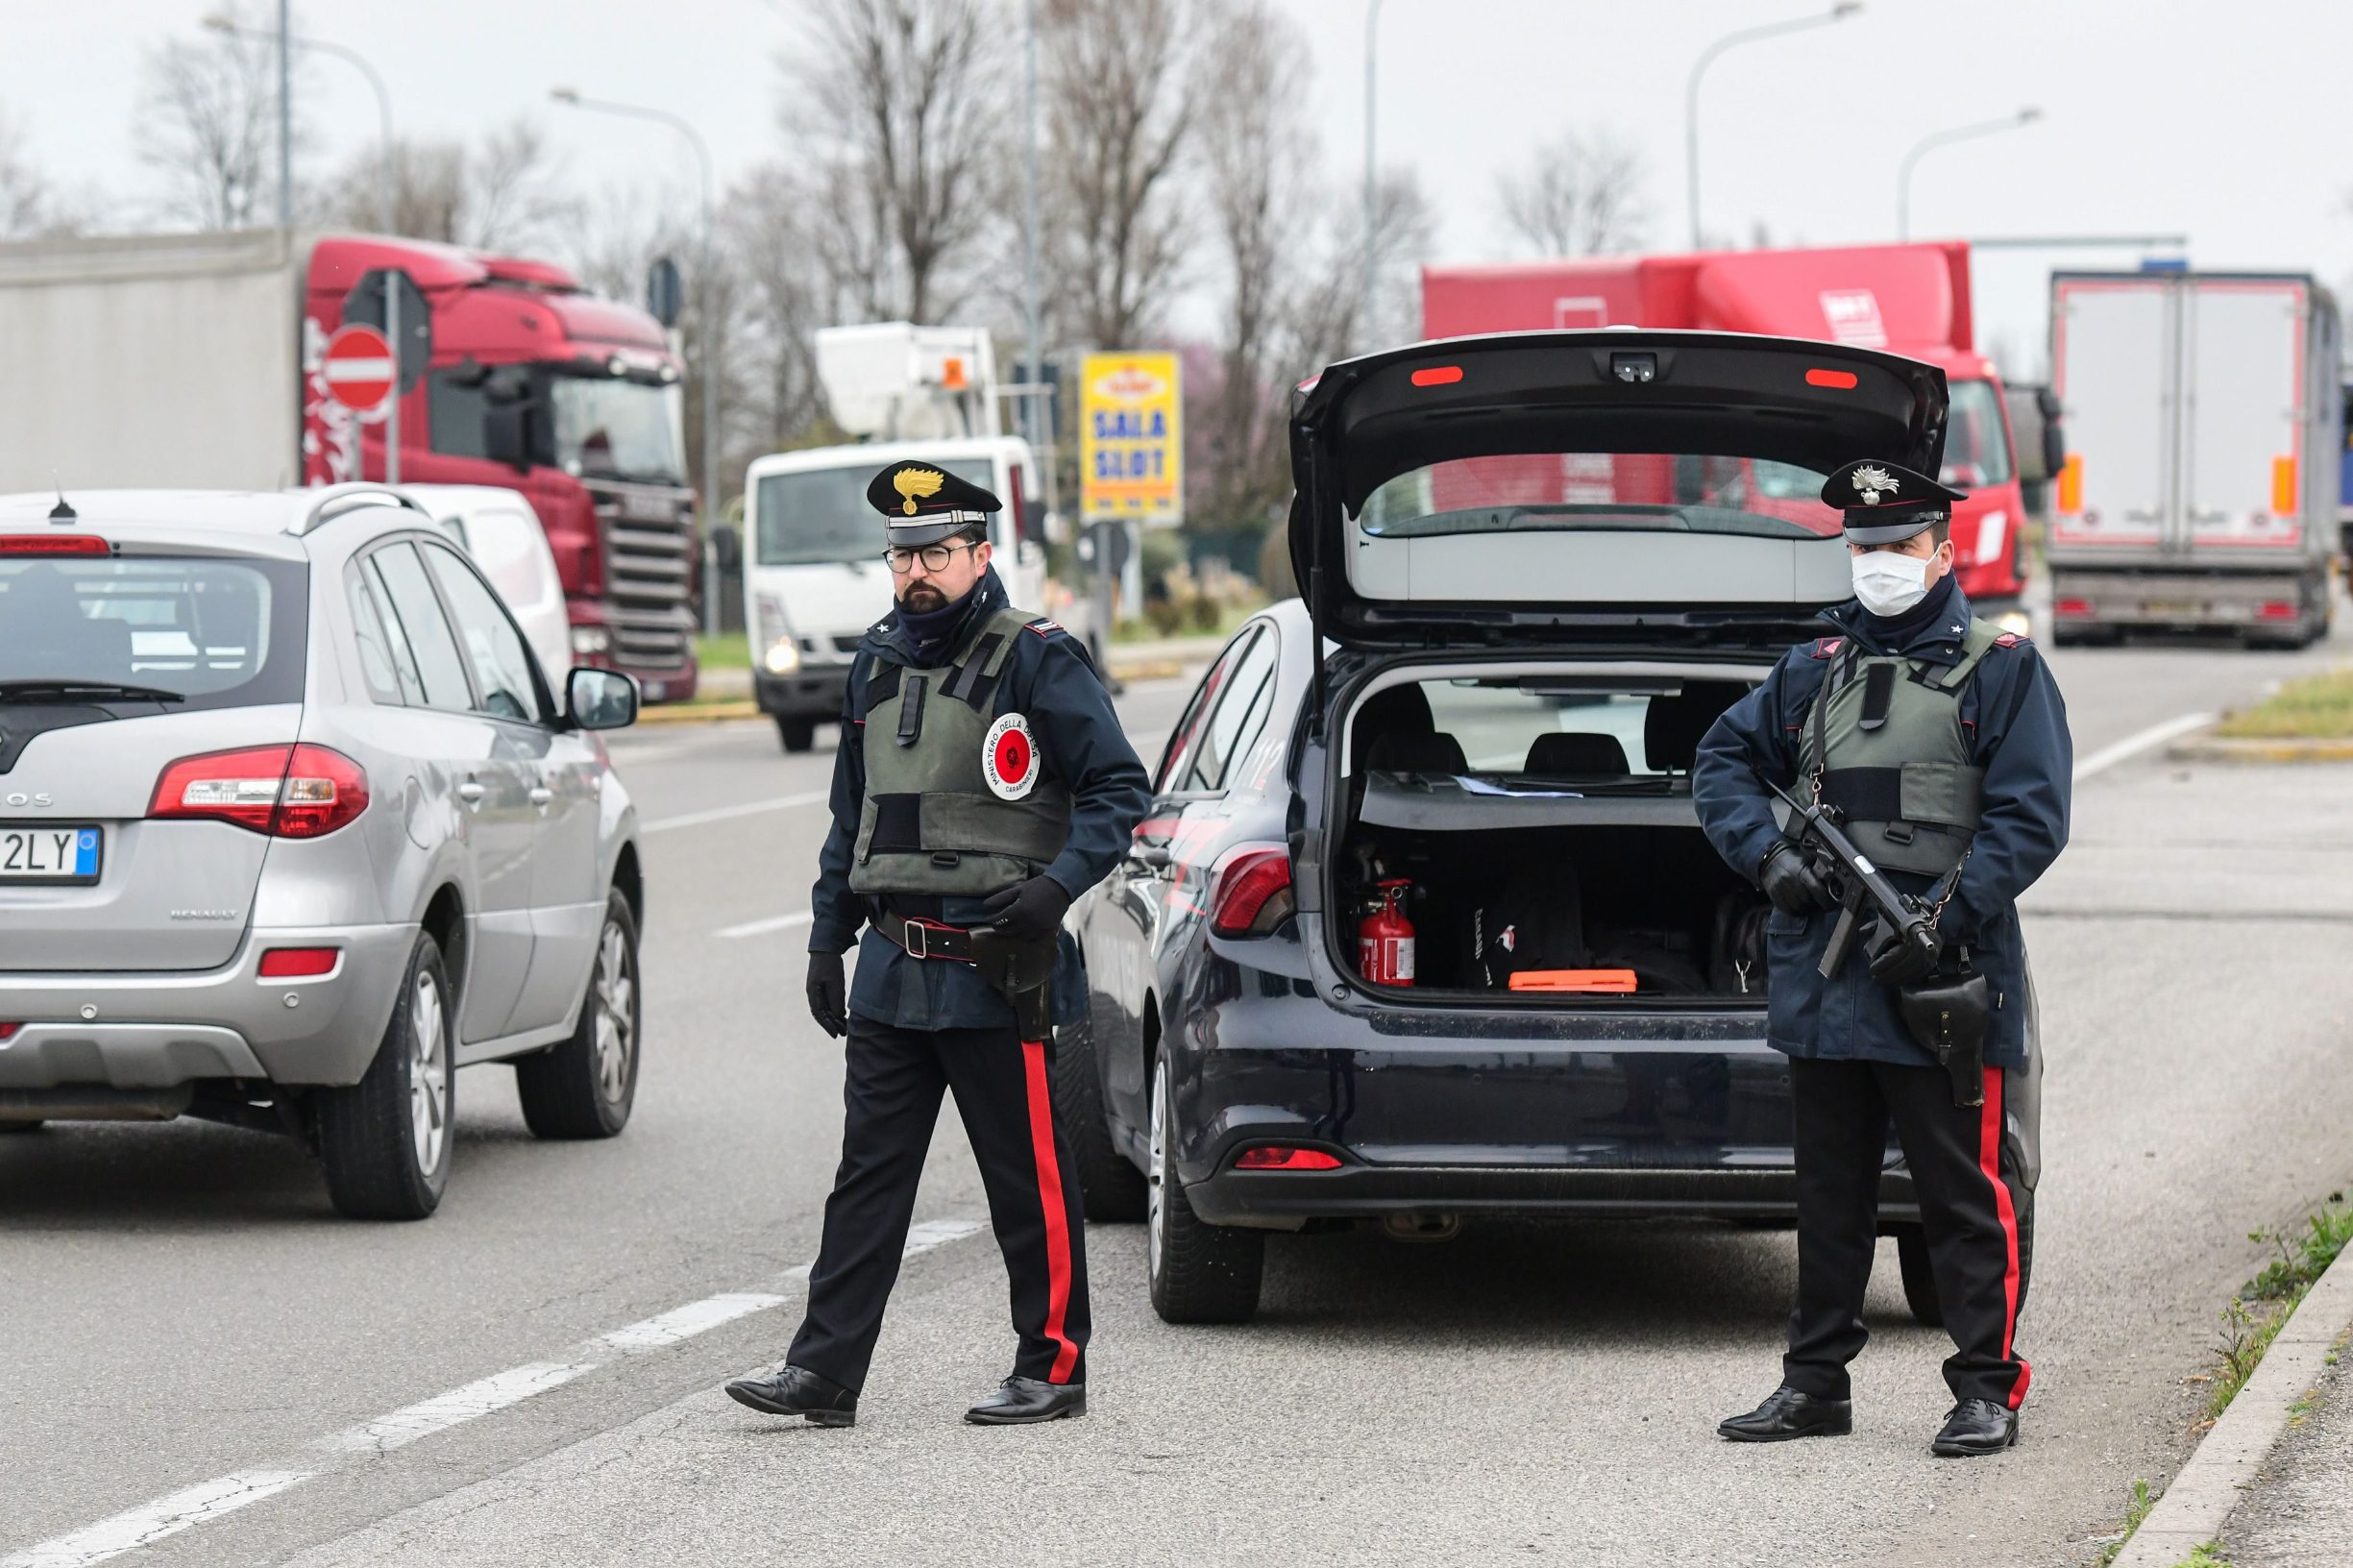 Armed Italian Carabinieri police officers hold a check point at the border between the quarantined provinces of Modena and Bologna on March 9, 2020 in Valsamoggia near Bologna, as Italy is battling the world's second-most deadly virus outbreak after China and has imposed a virtual lockdown on the north of the country. (Photo by Piero CRUCIATTI / AFP)